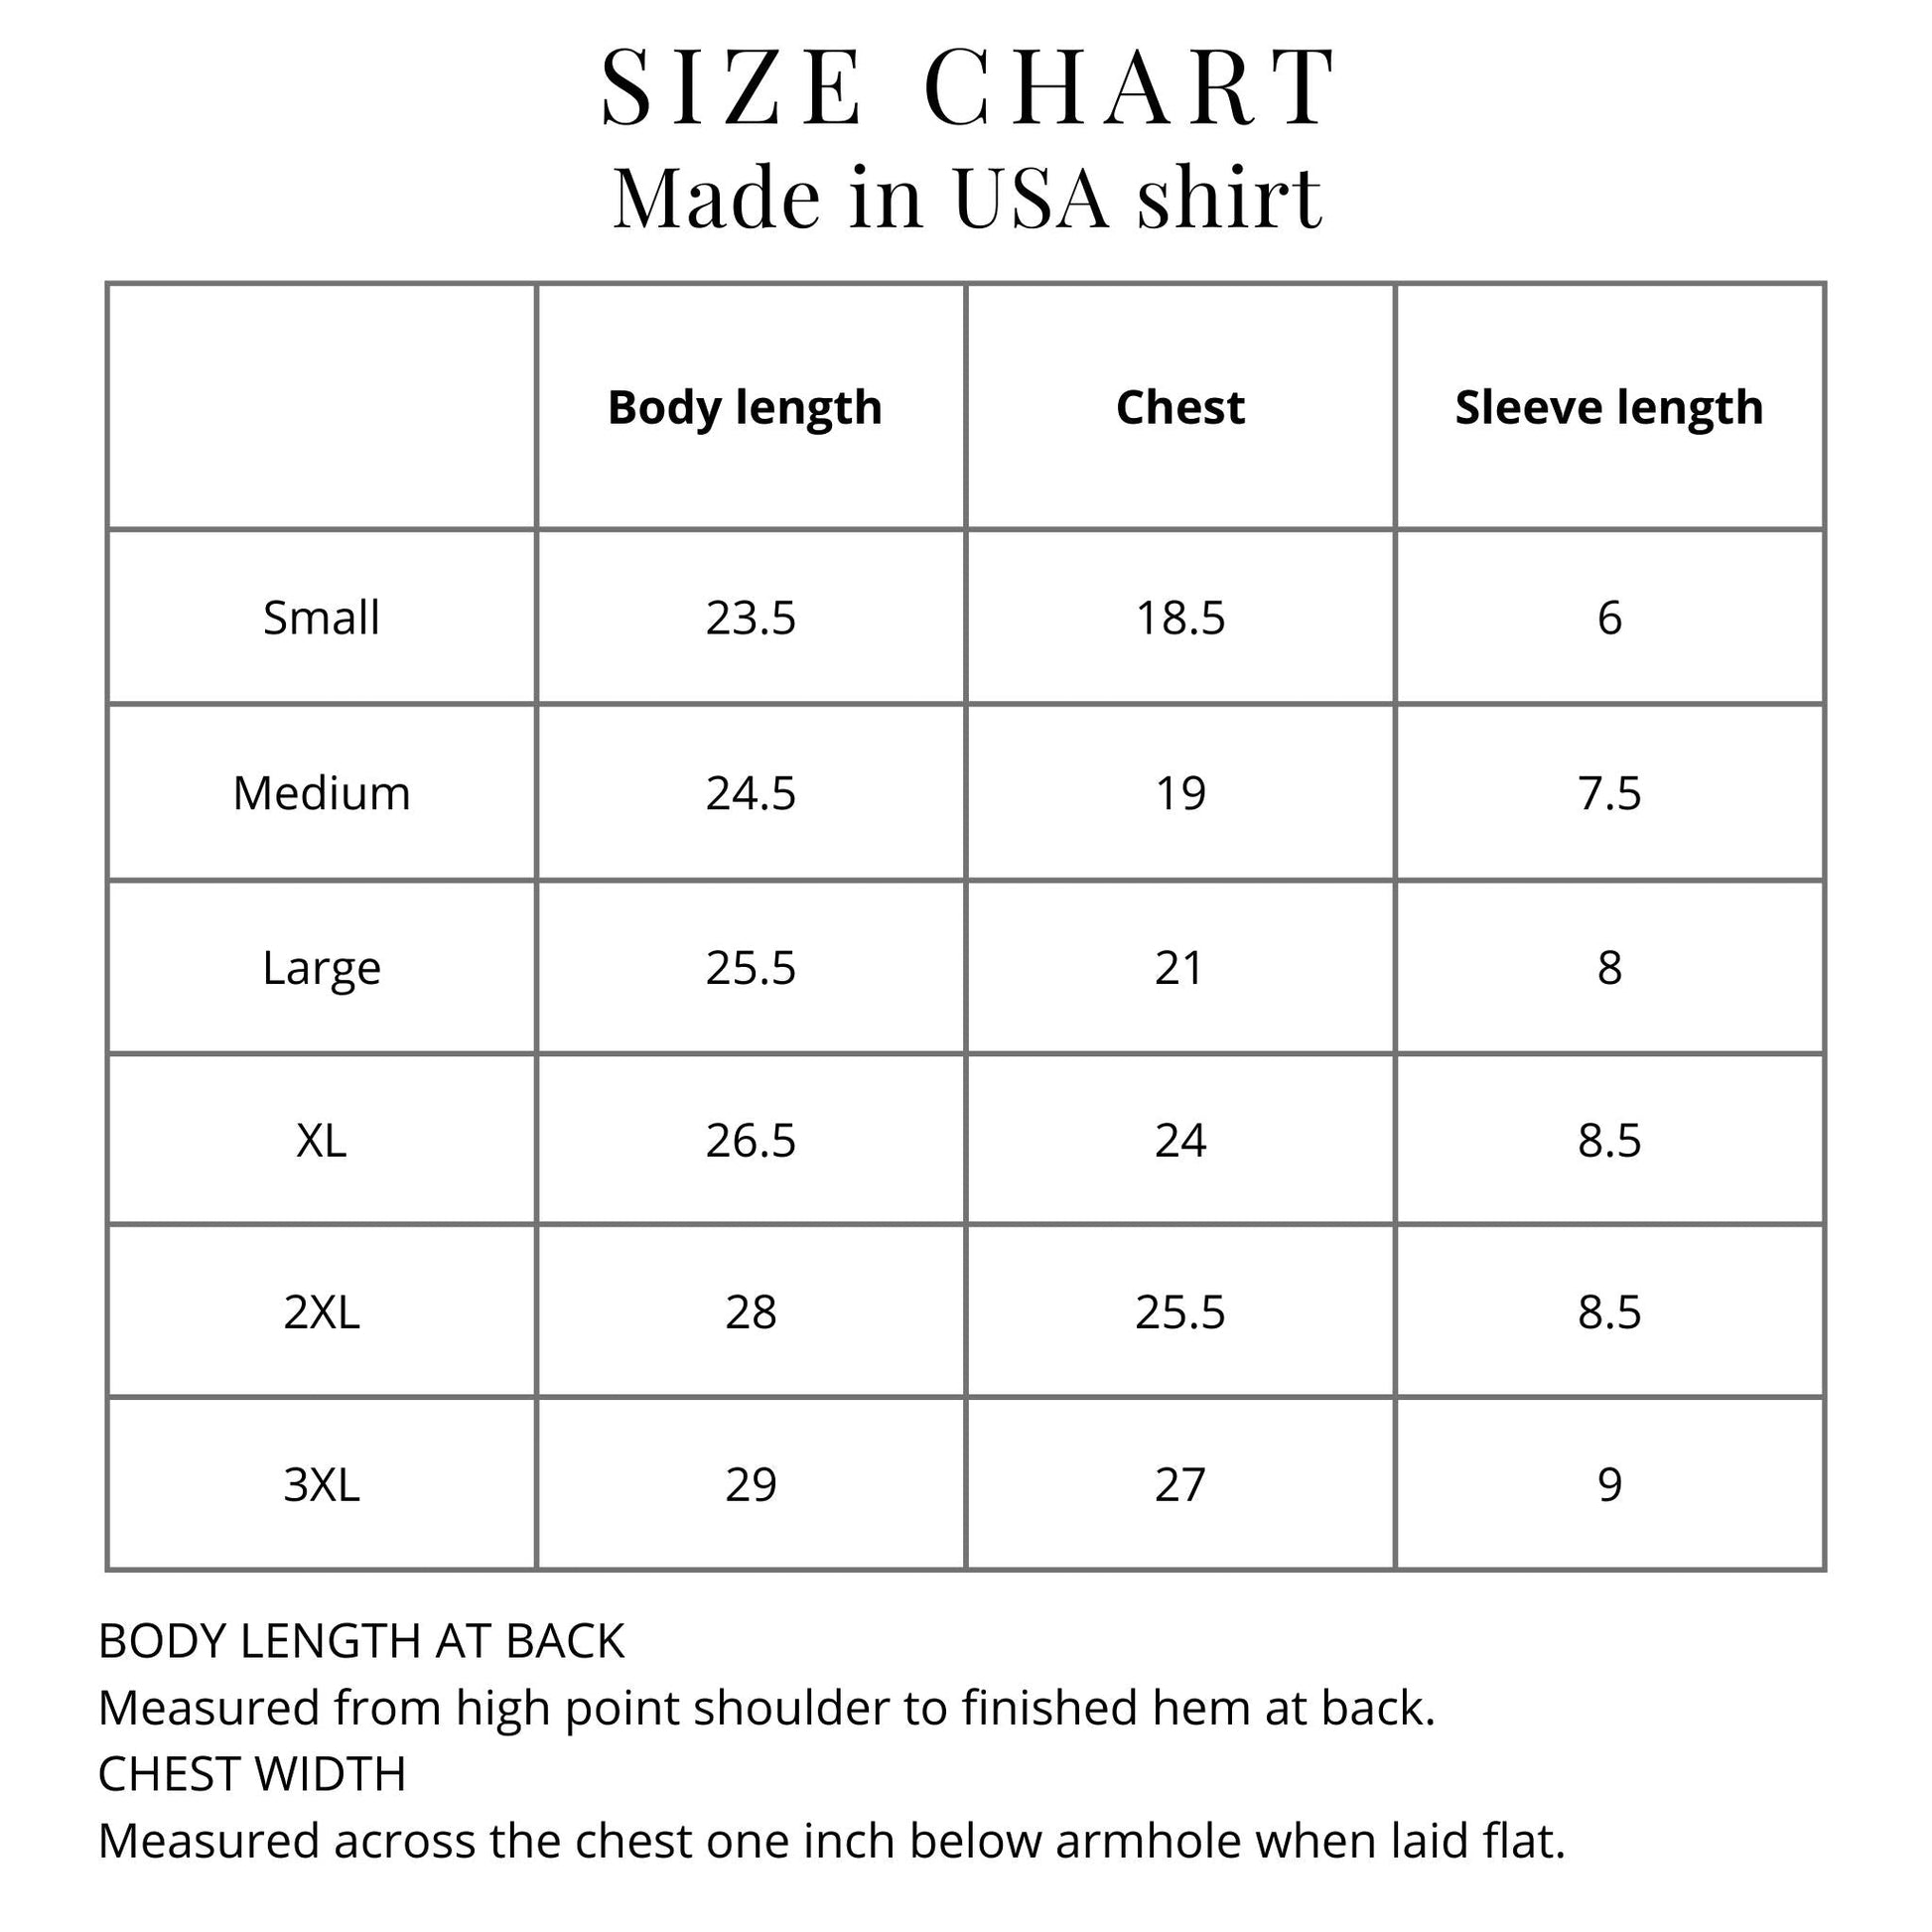 Size chart for 100% cotton Made in America t-shirt from The History List store